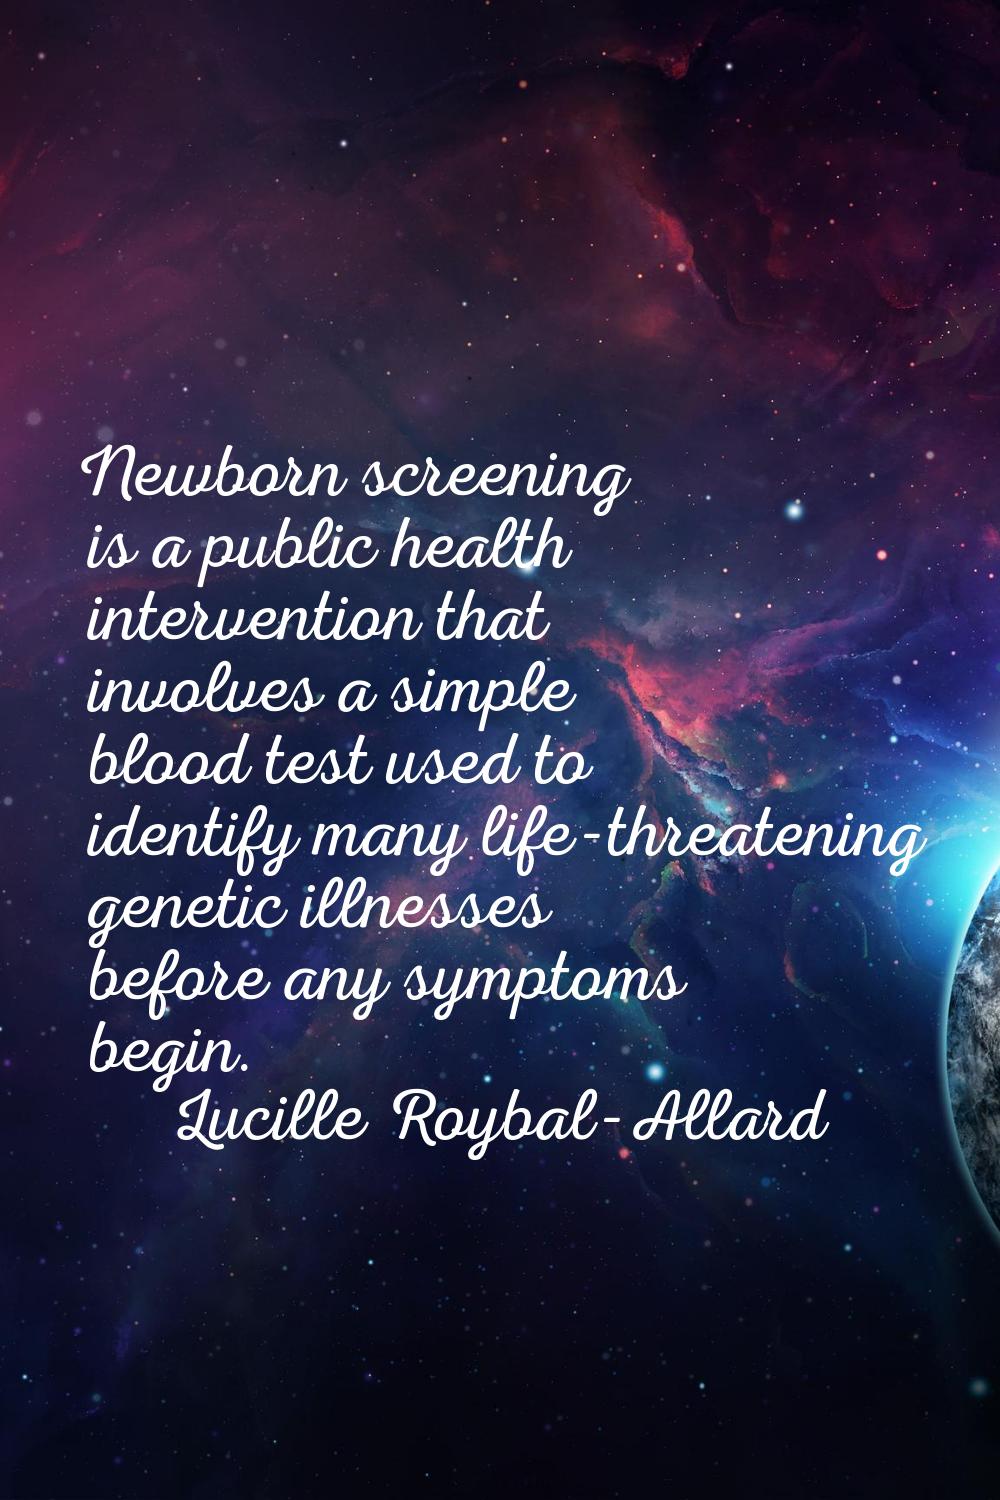 Newborn screening is a public health intervention that involves a simple blood test used to identif